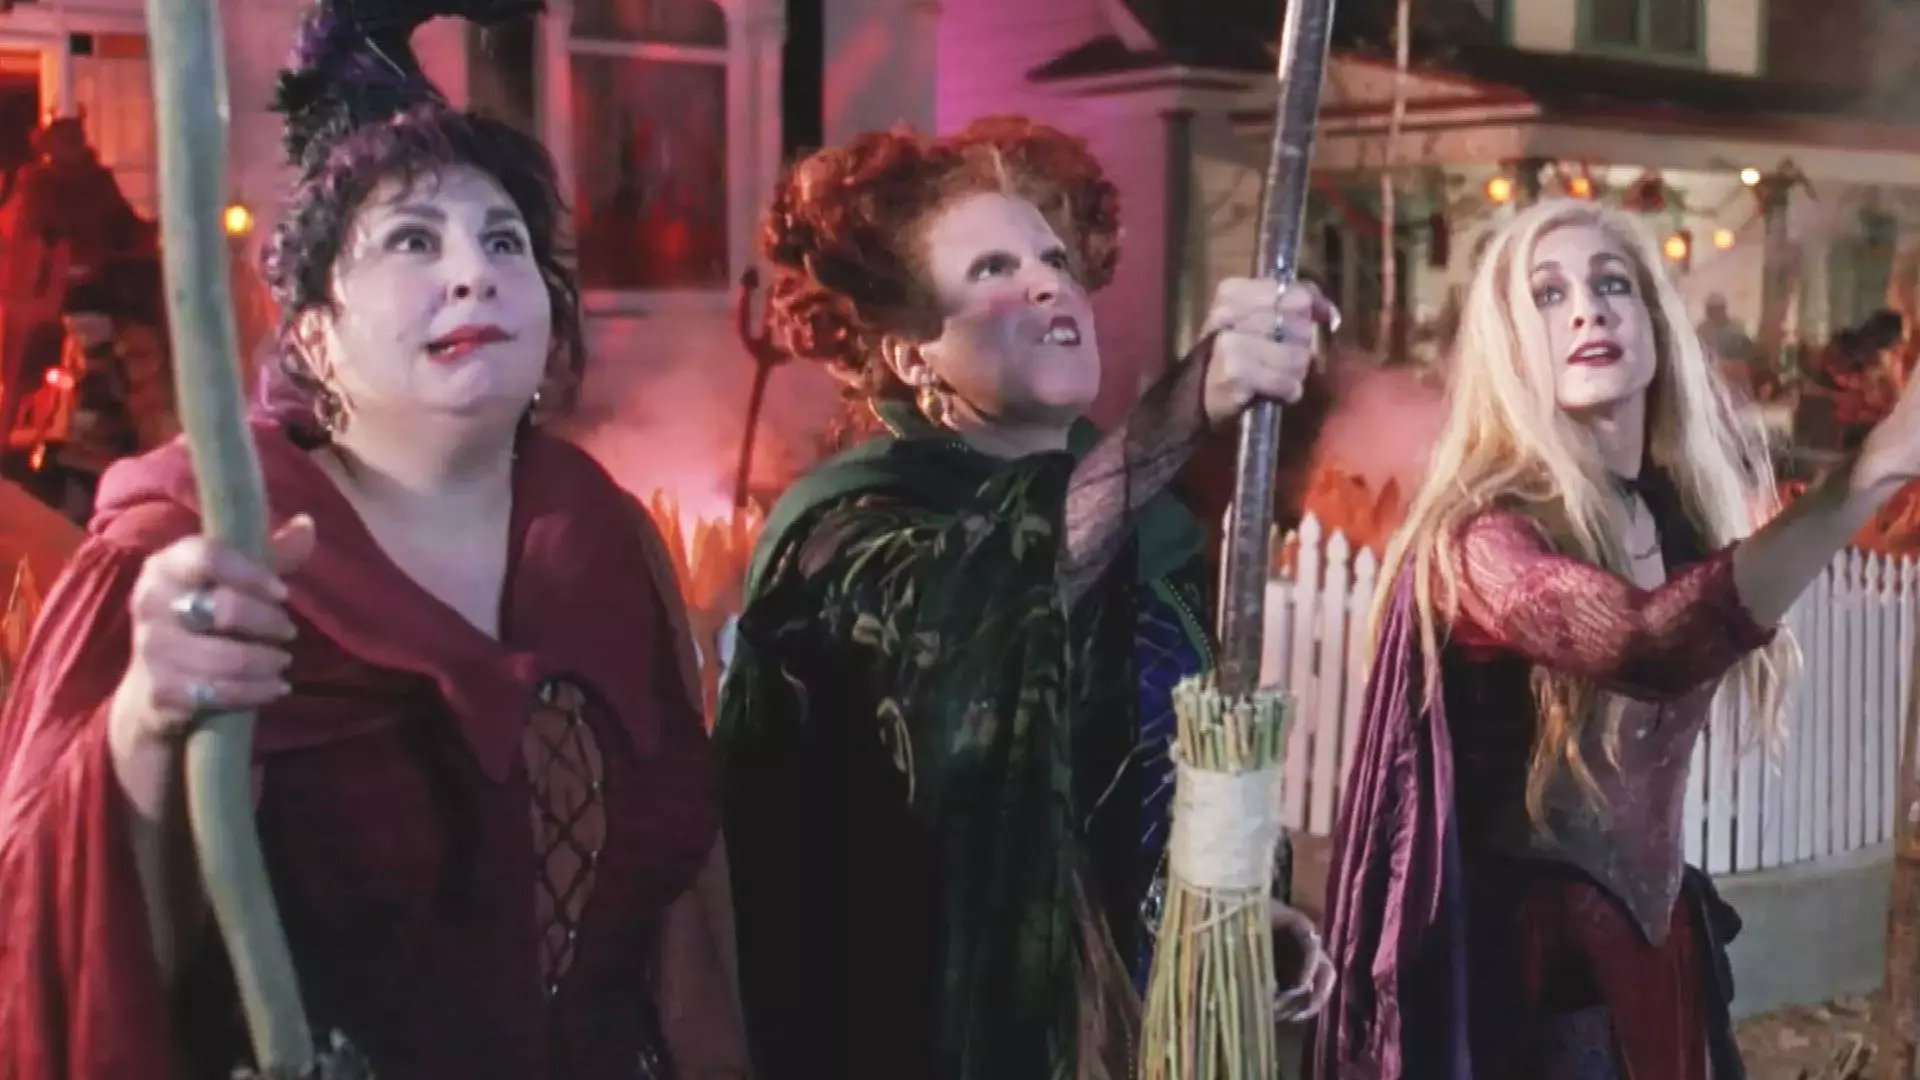 The Sanderson sisters will be back together this Halloween - but virtually! (